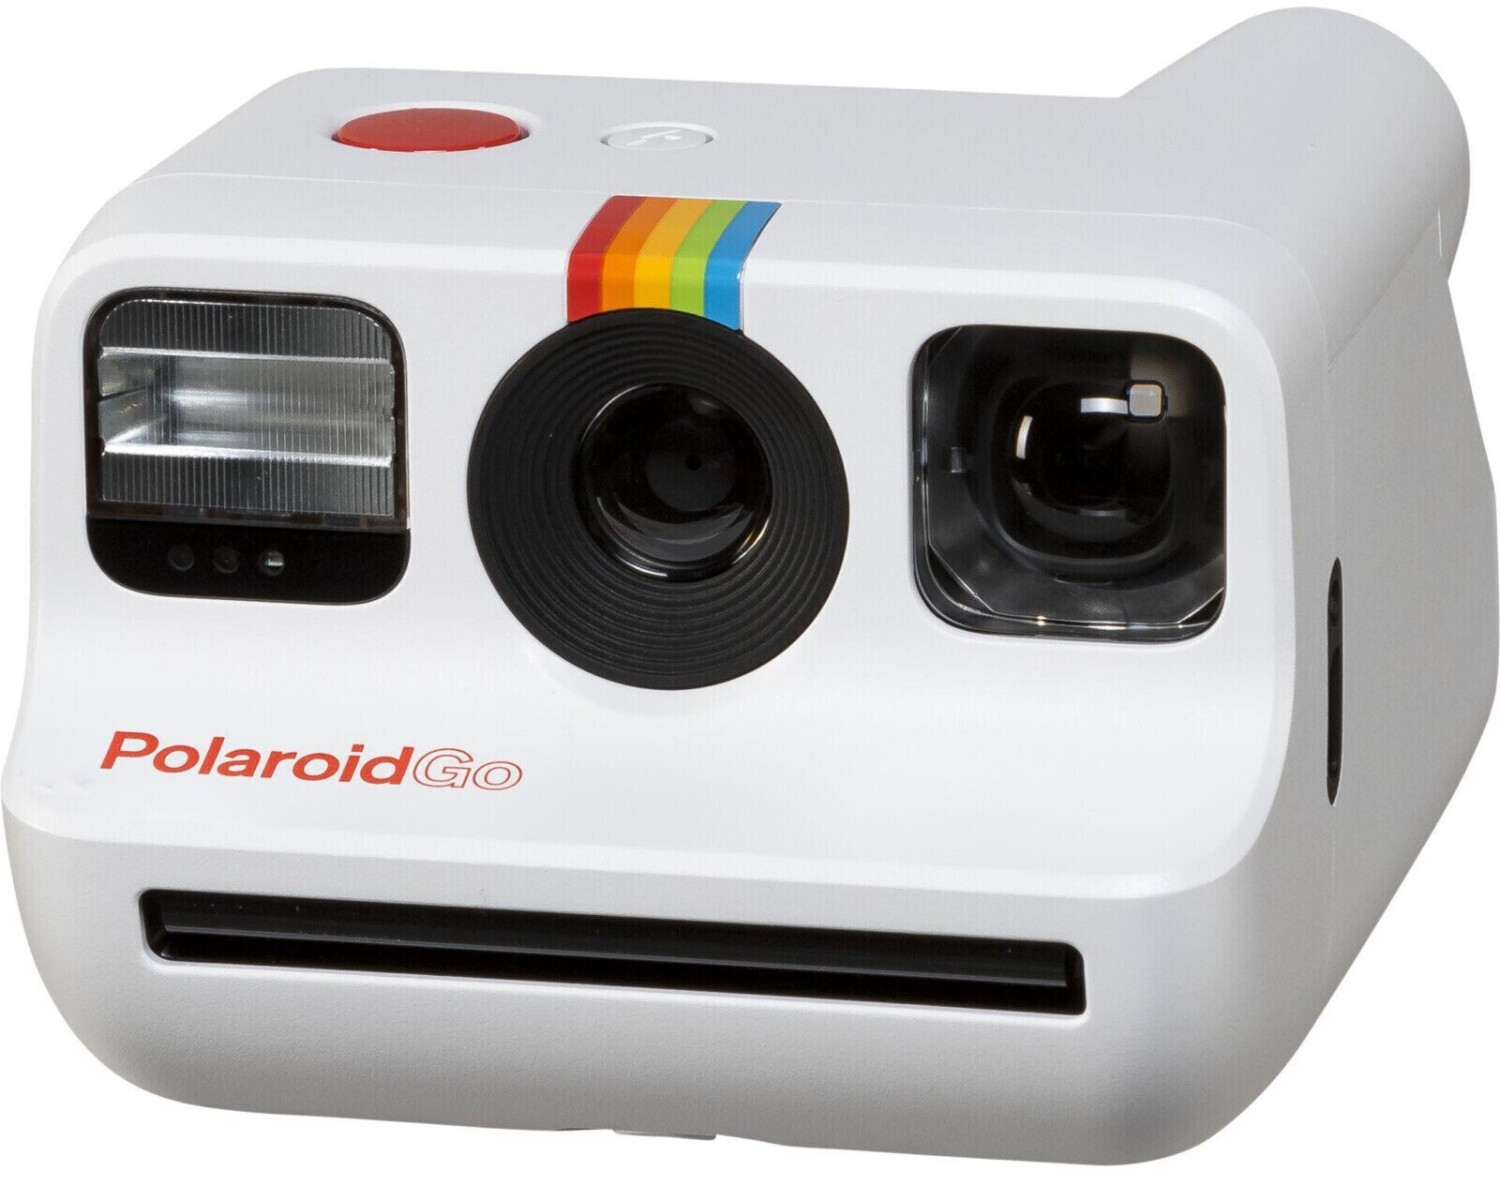  Polaroid Go Instant Mini Camera - Red (9071) - Only Compatible  with Polaroid Go Film : Electronics